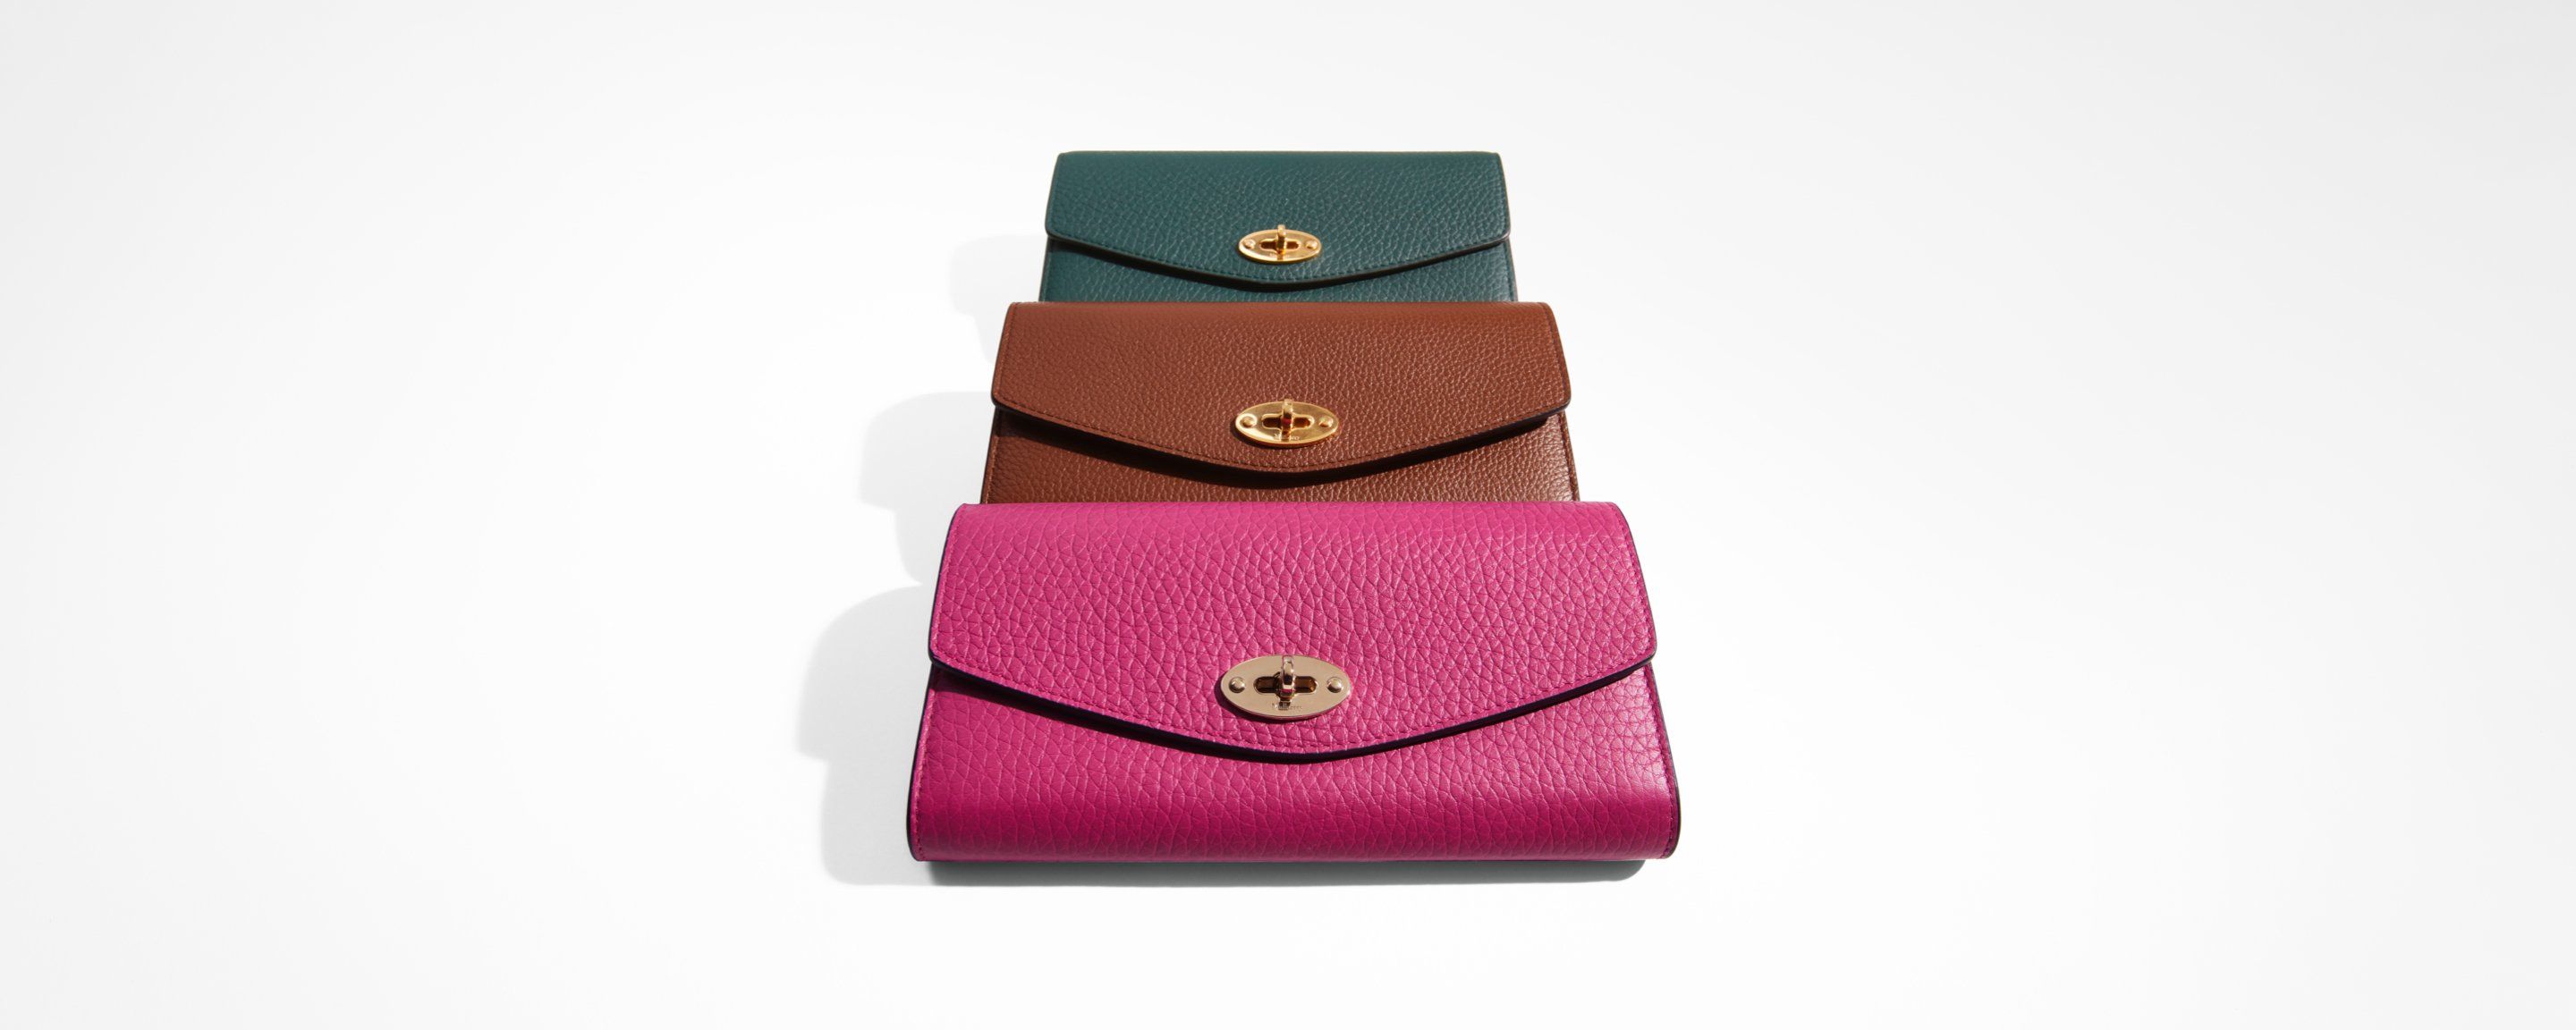 Three Darley Wallets in Mulberry Pink, Oak and Mulberry Green